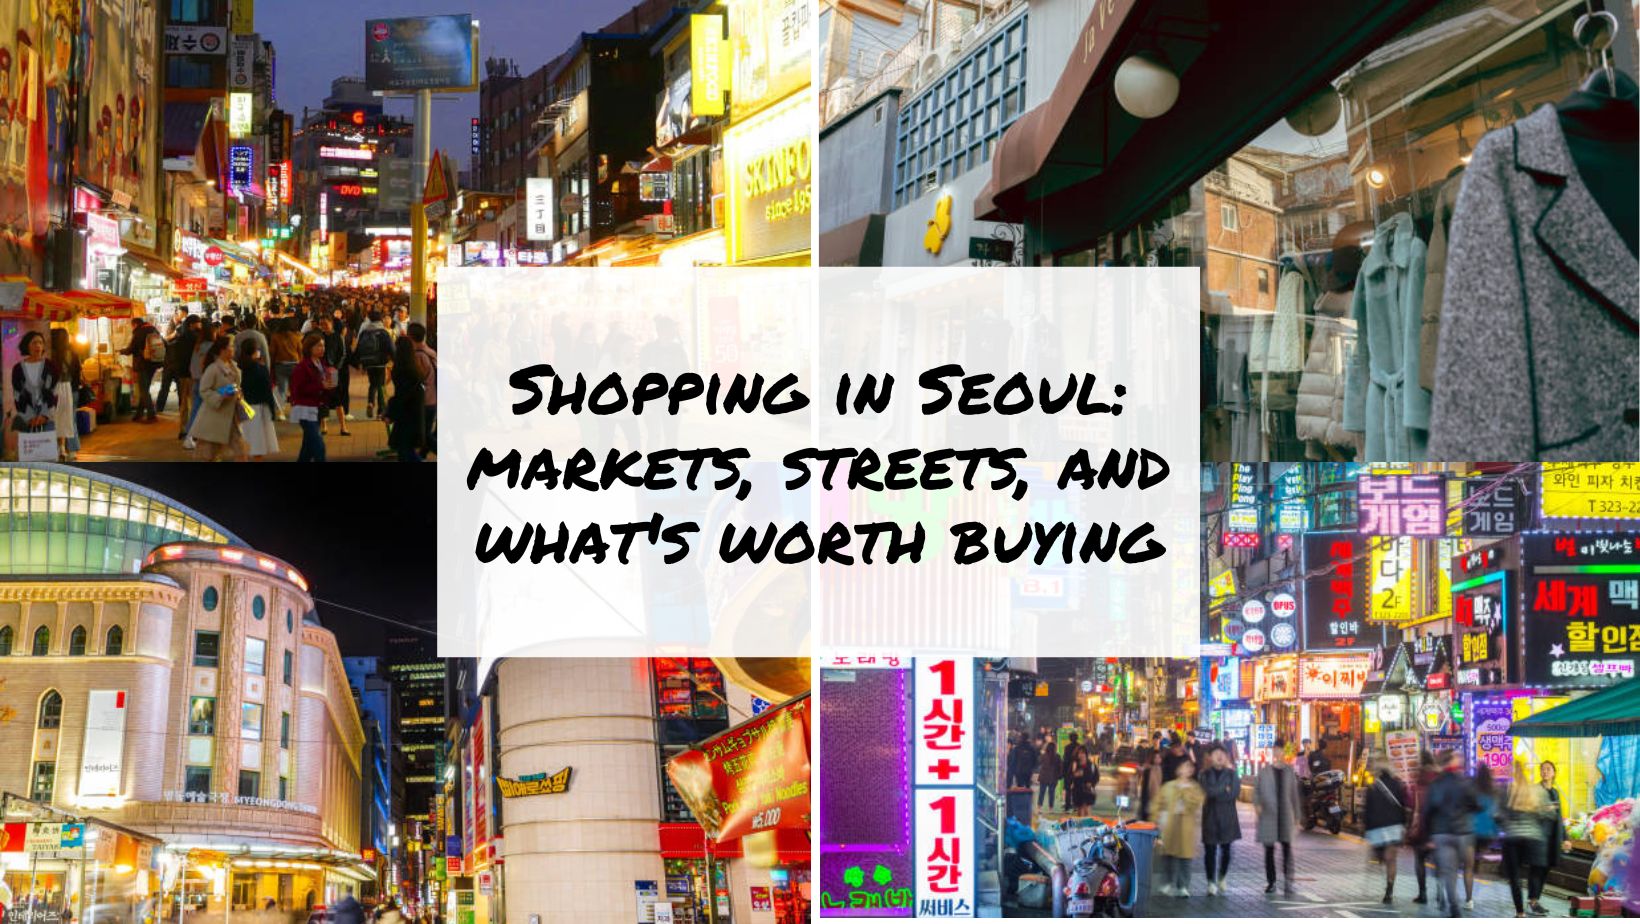 Shopping in Seoul markets, streets, and what's worth buying